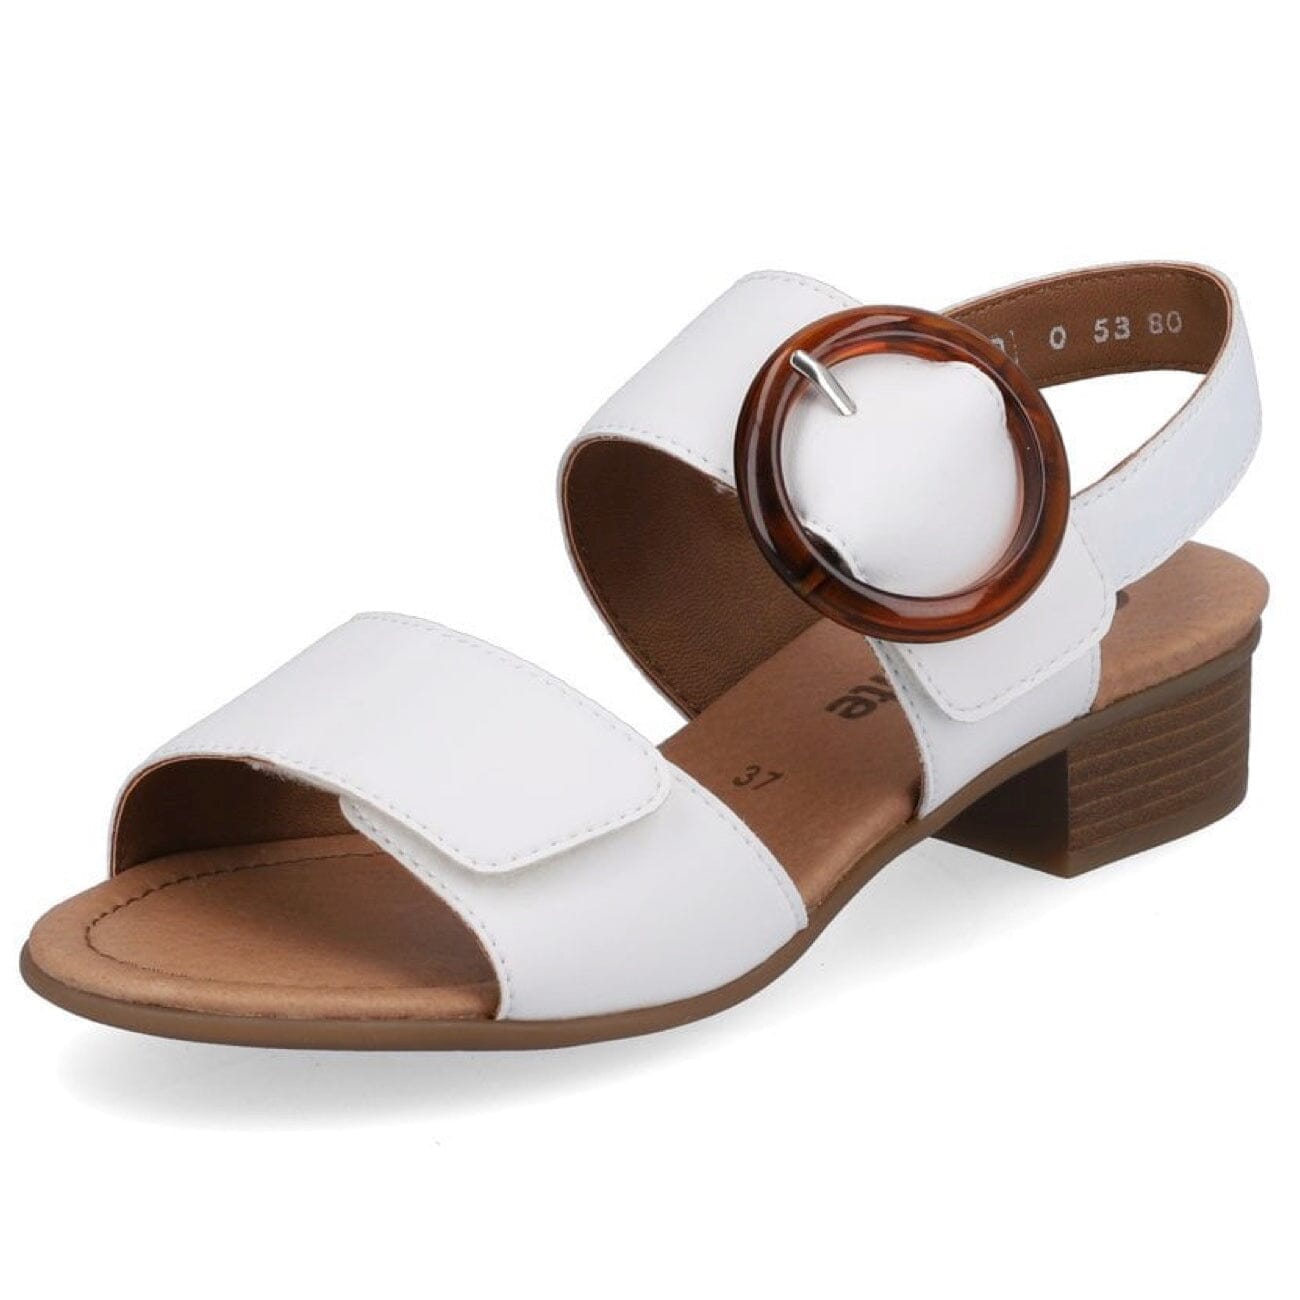 Remonte, Weiss Sandal, Leather, White/Weiss Sandals Remonte Weiss/White 37 